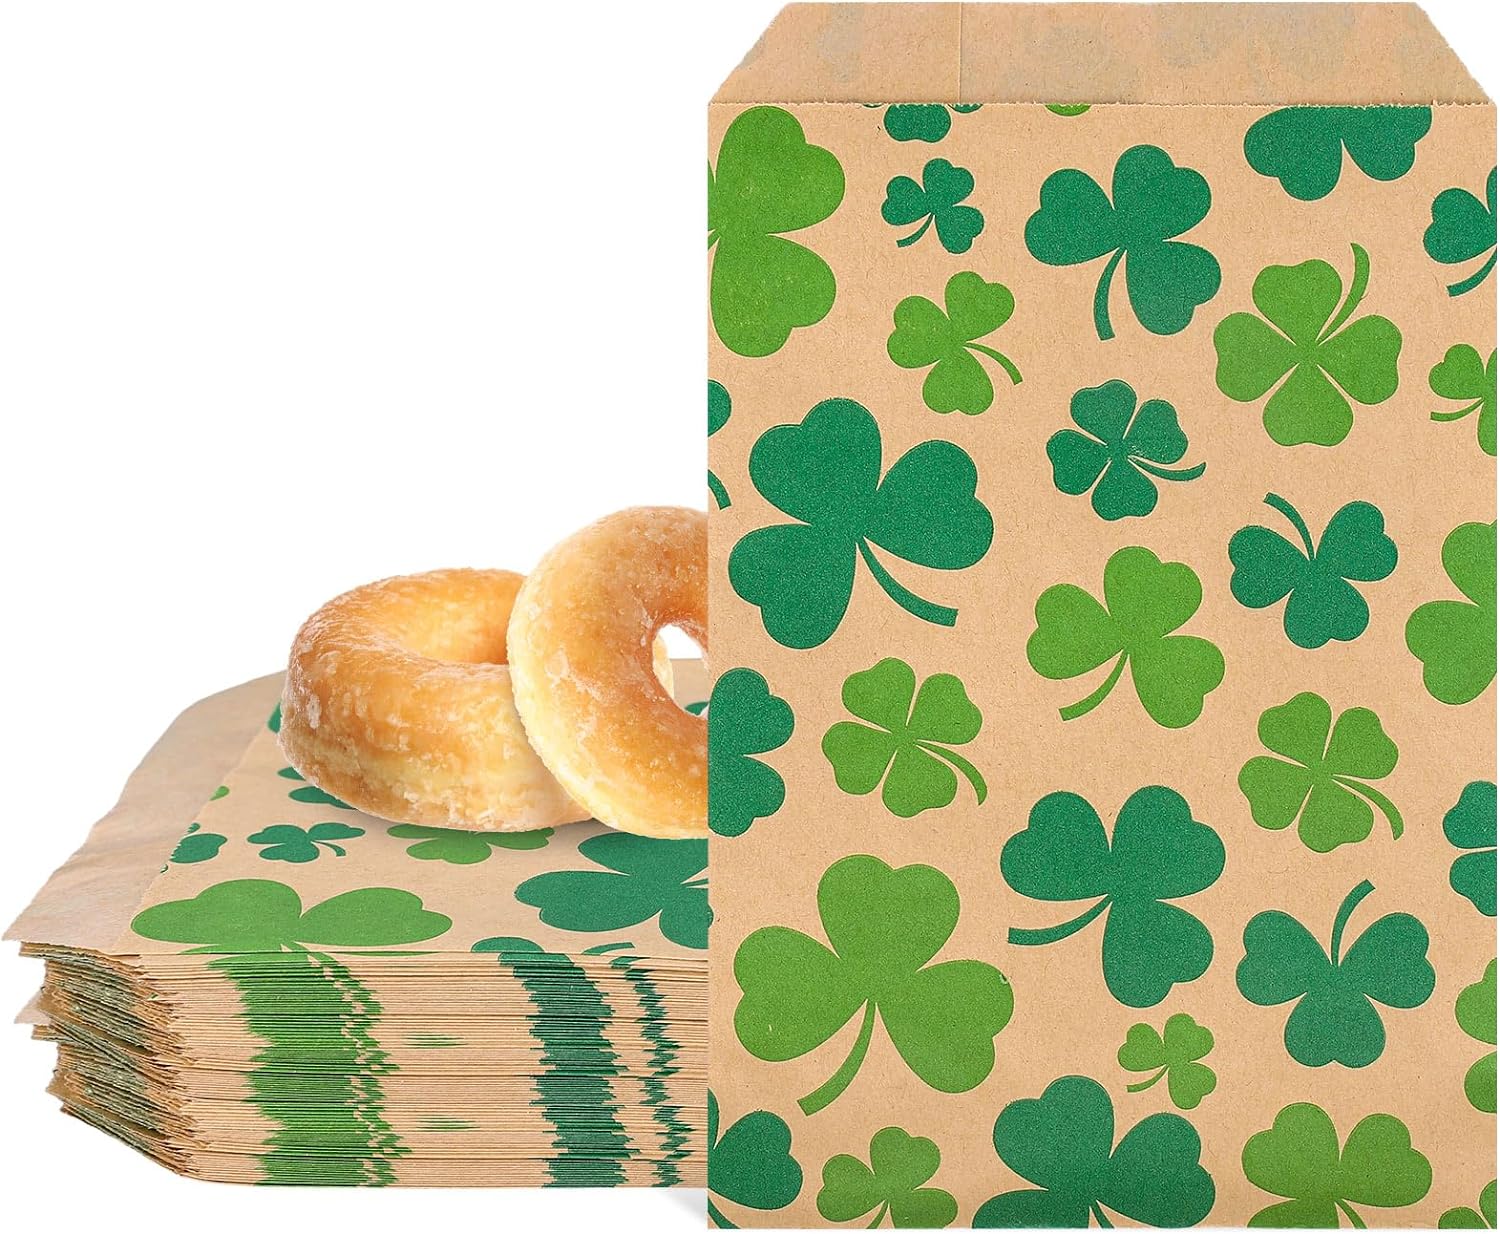 Whaline 100 Pack St. Patrick' Day Treat Bags Green Shamrock Kraft Paper Gift Bags Clover Prints Candy Bags Rustic Goodie Snack Cookie Buffet Bags for Irish Holiday Party Favor Supplies